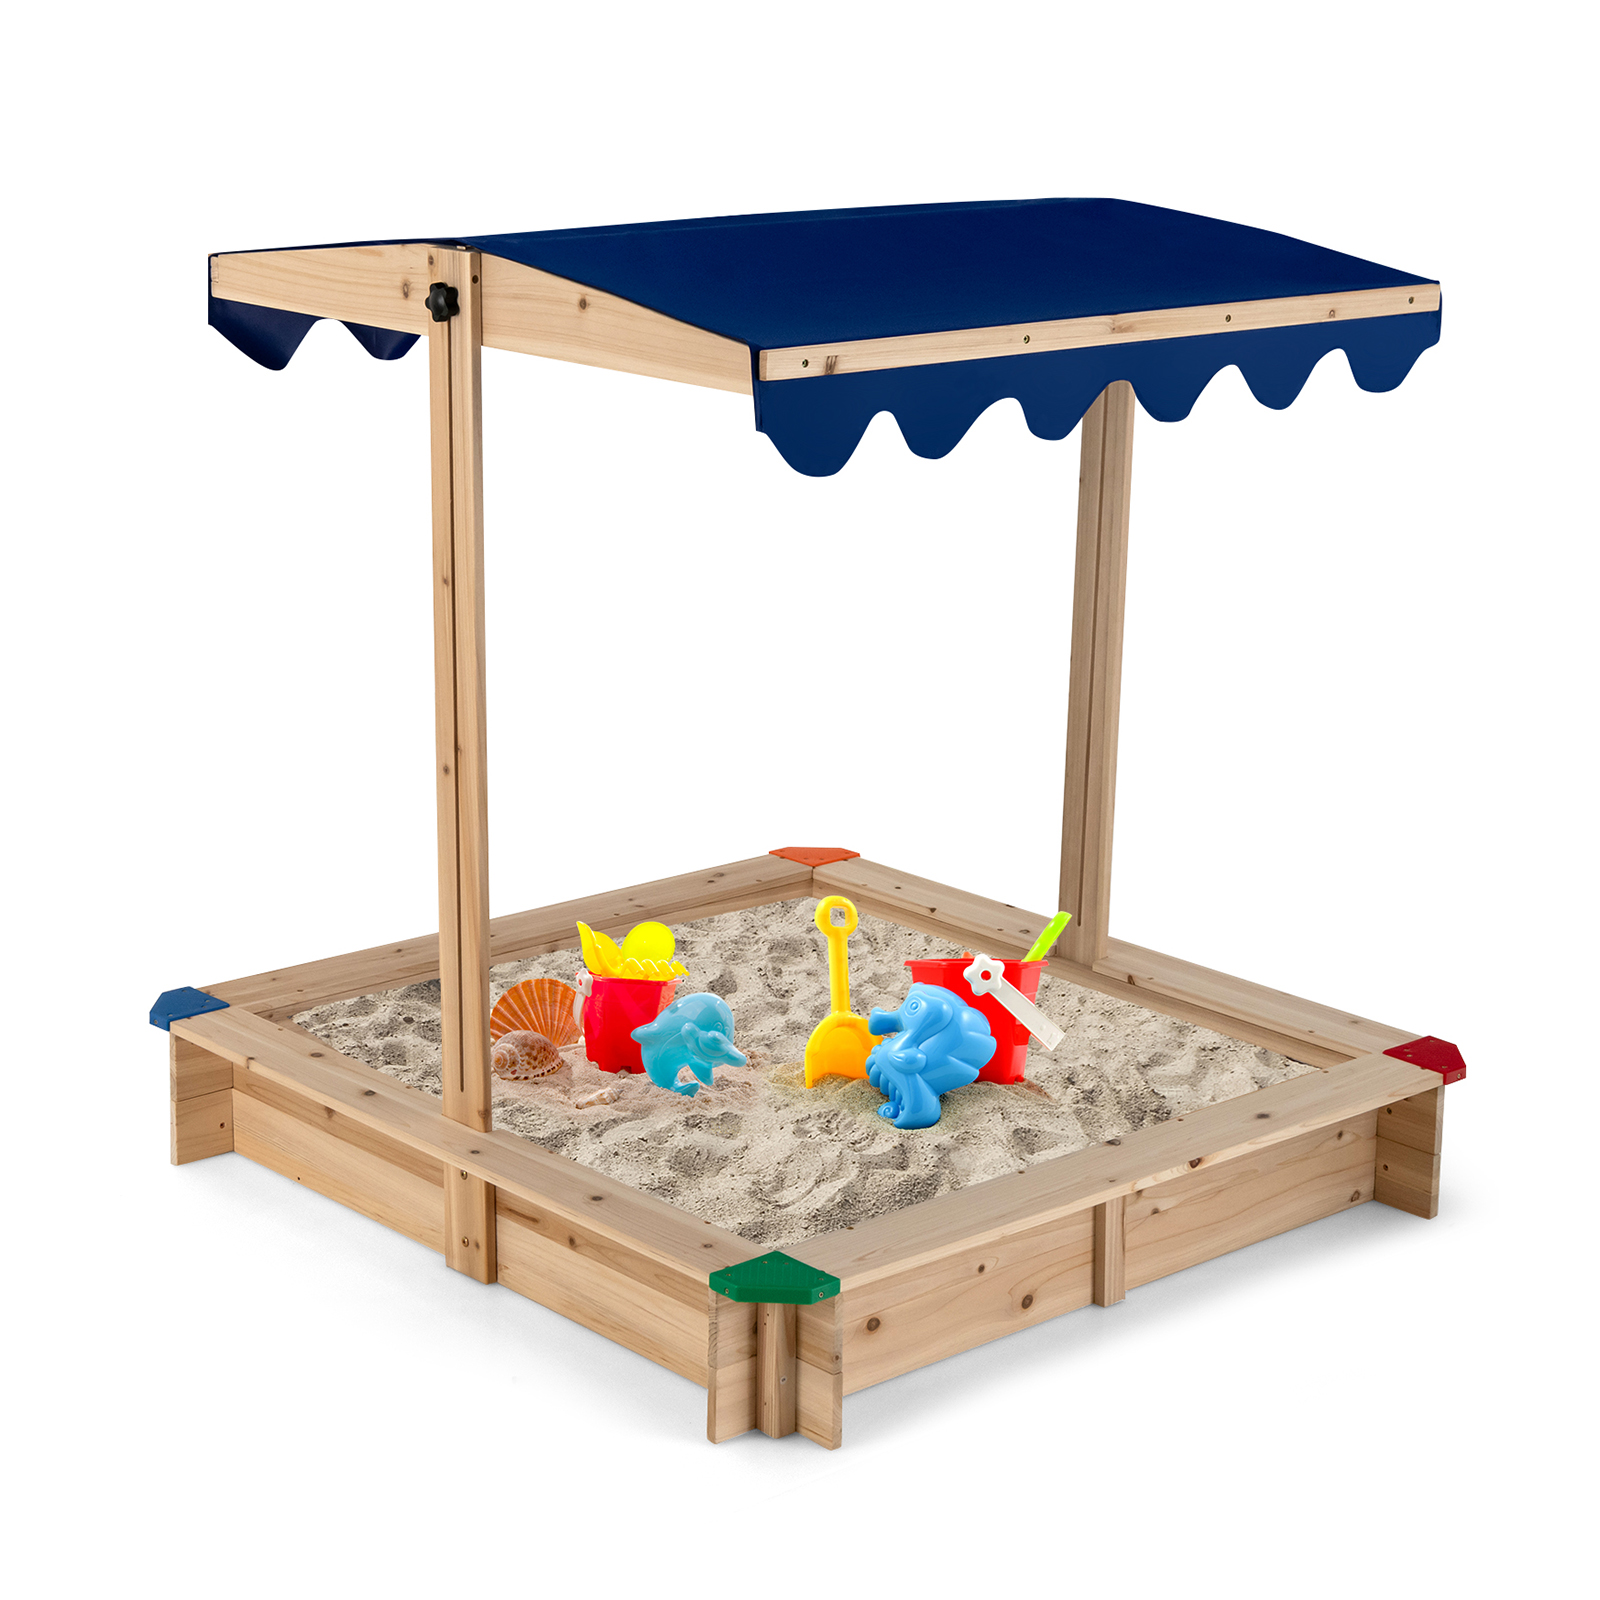 Wooden Kids Sandbox with Height-Adjustable Canopy and Protective Corners